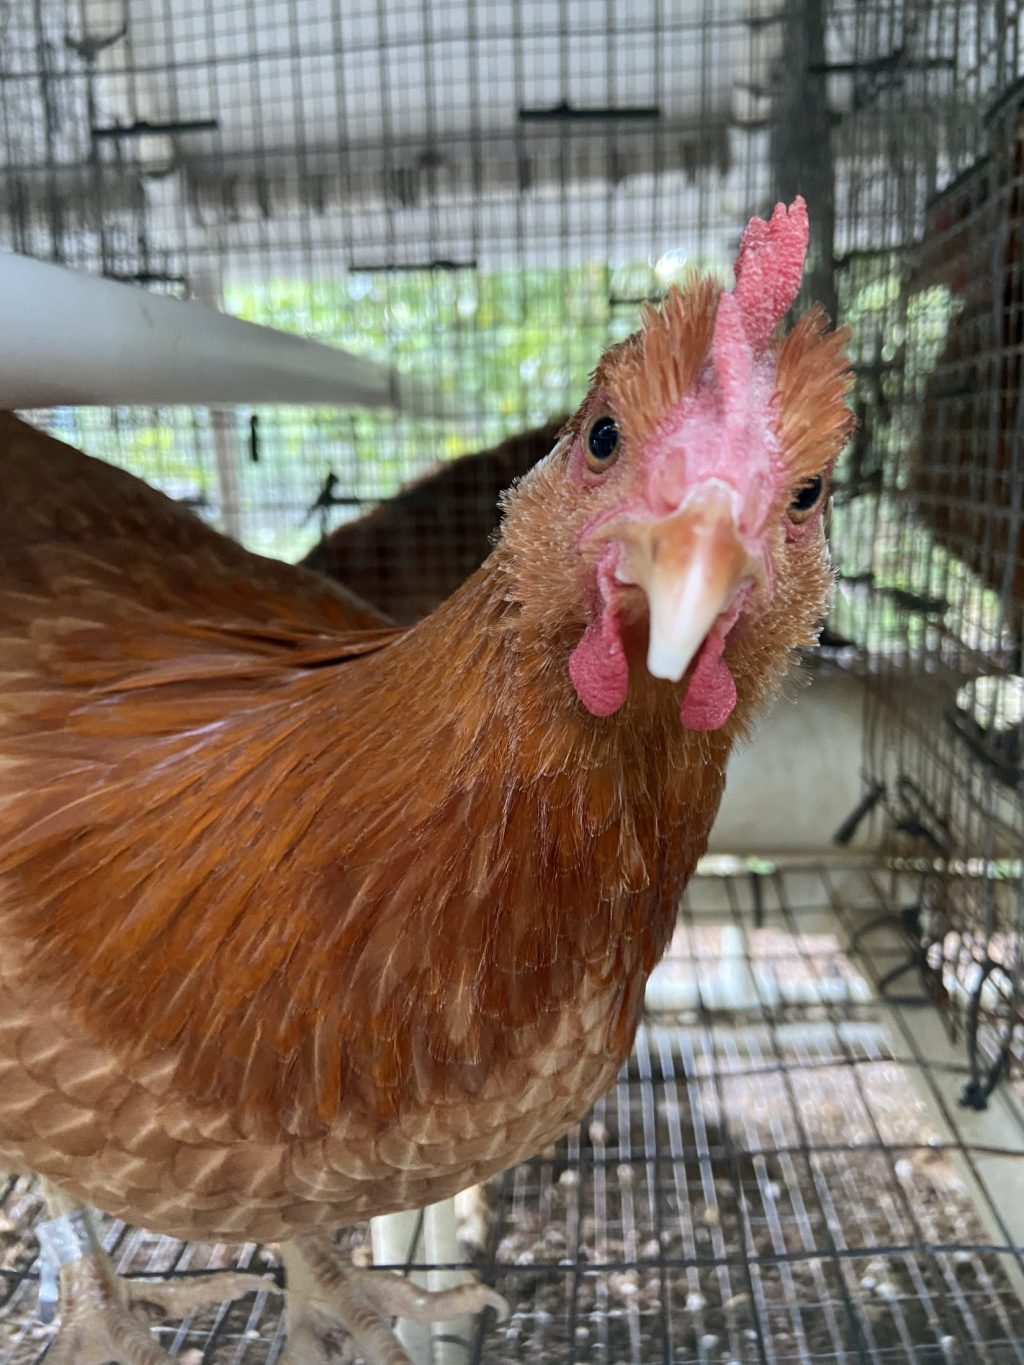 A chicken with brown feathers has its head turned towards the camera.